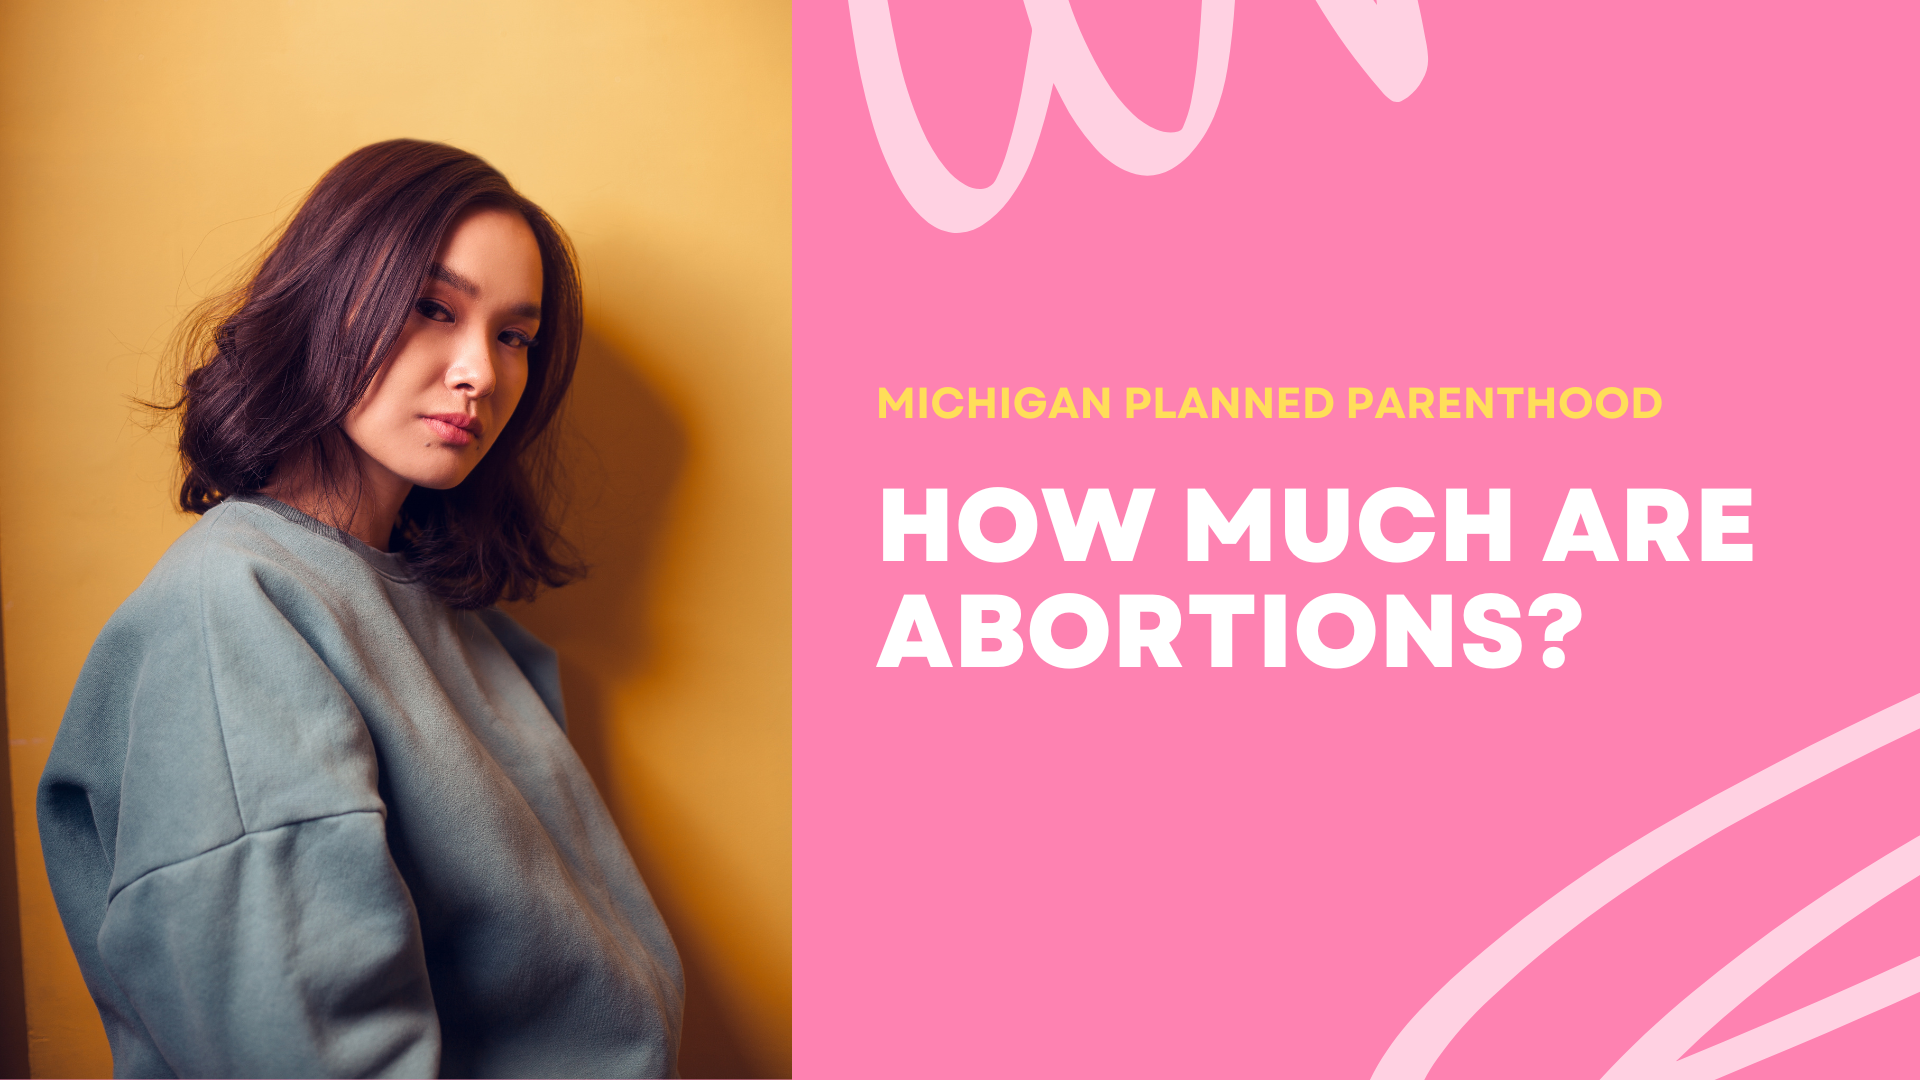 How much are abortions at Planned Parenthood in Michigan? 